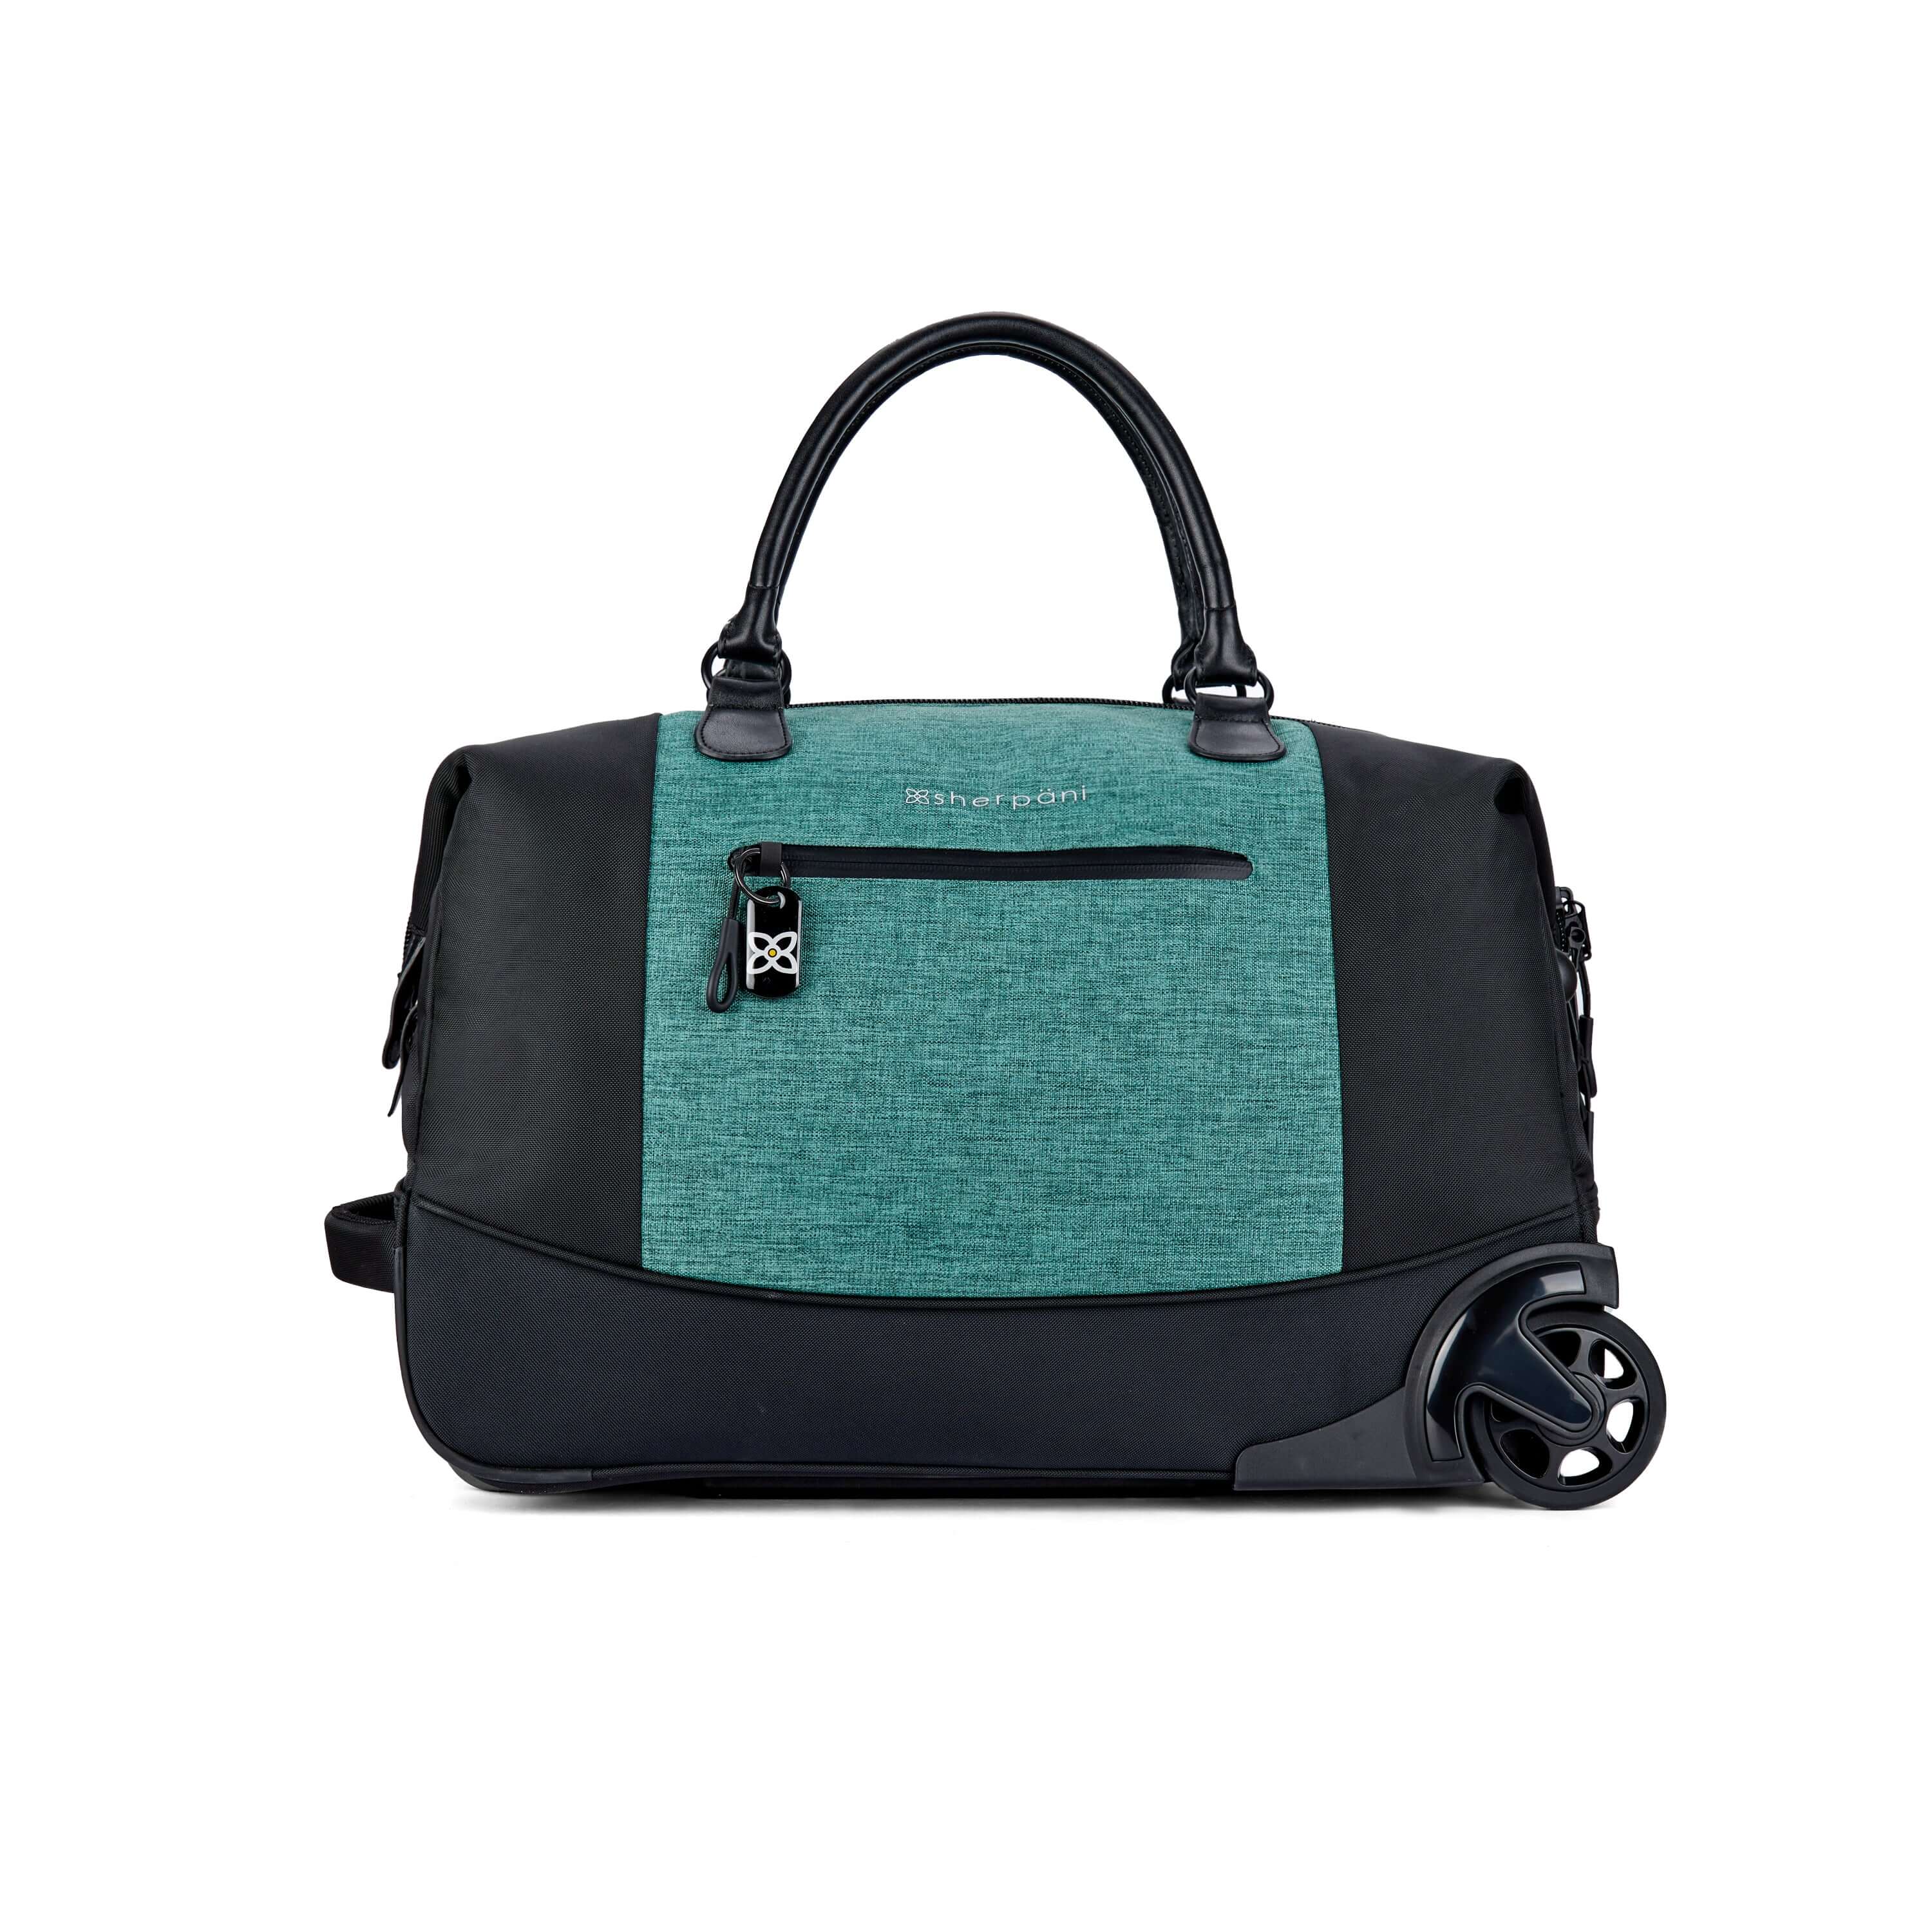 Flat front view of Sherpani’s Anti Theft rolling Duffle, the Trip in Teal, with vegan leather accents in black. The bag lies flat on the ground with a retractable luggage handle hidden on the left side and the rolling wheels shown on the right side. The bag features short tote handles at the top and an external zipper compartment on the front panel with locking zipper and ReturnMe tag. 